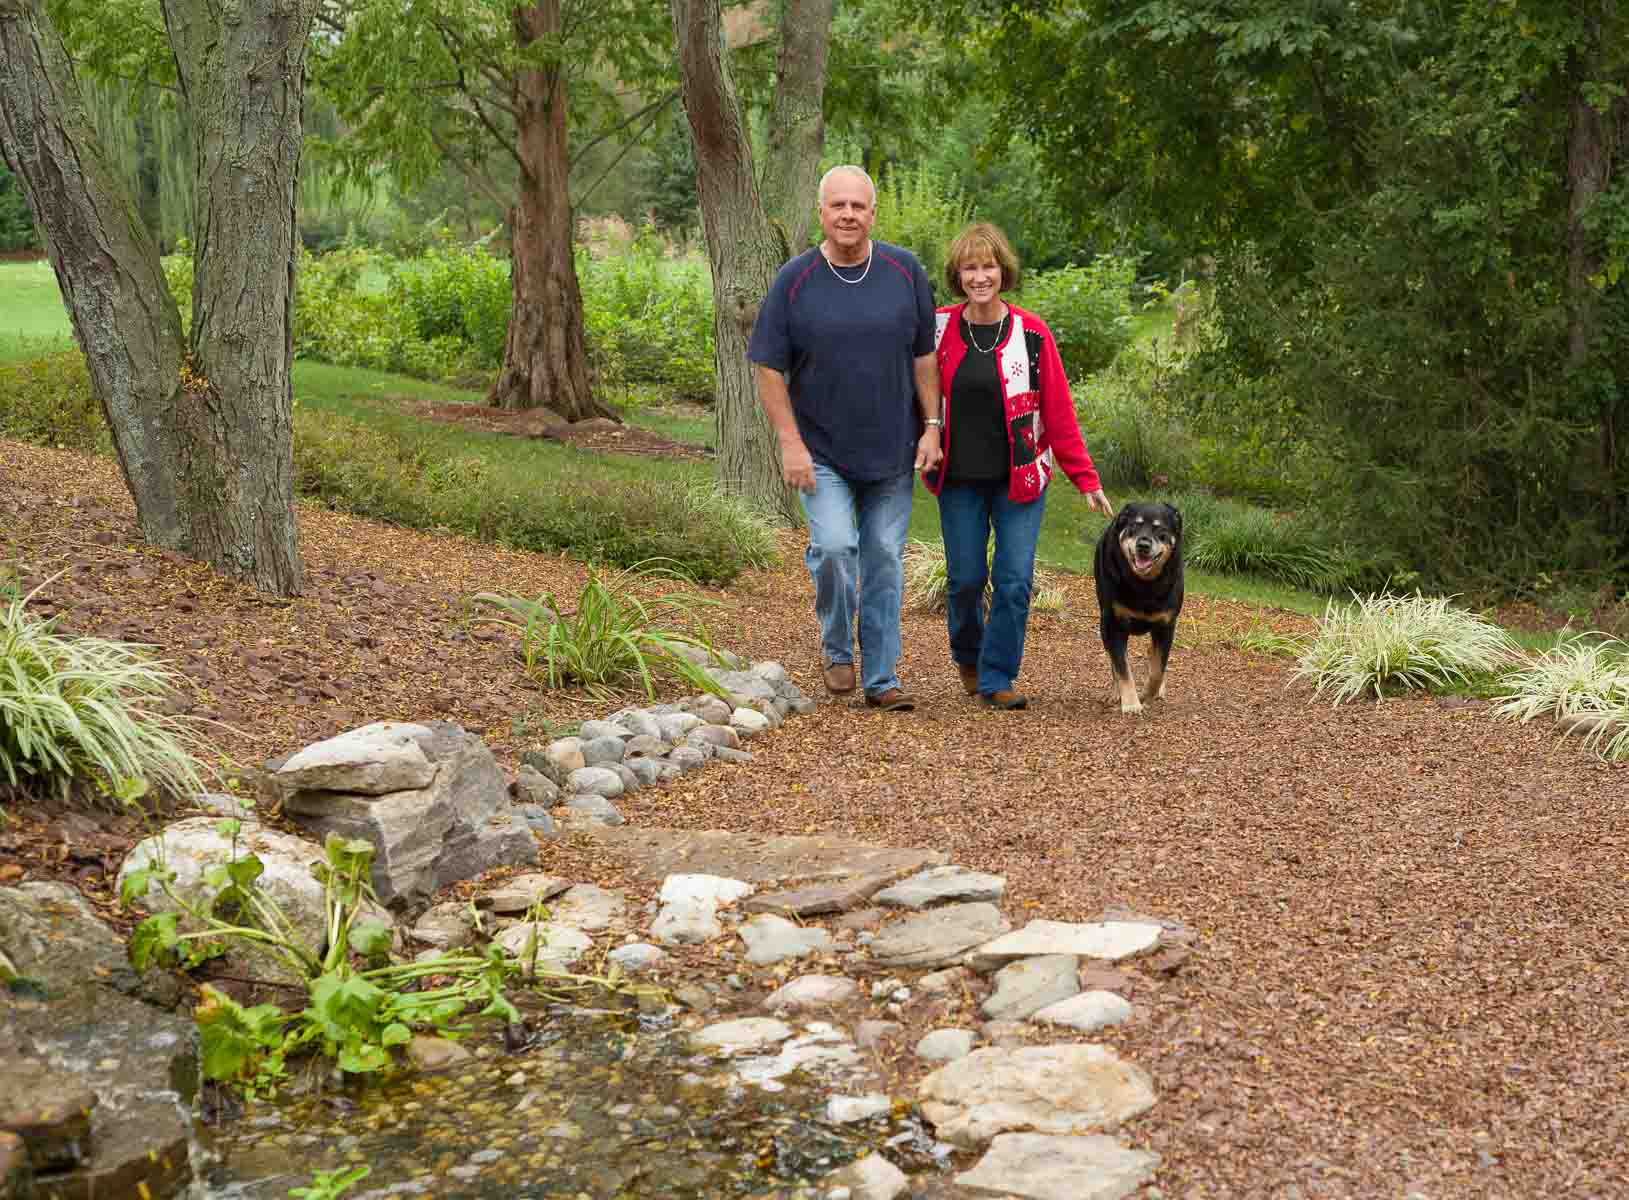 A man and woman walking their dog down the path.